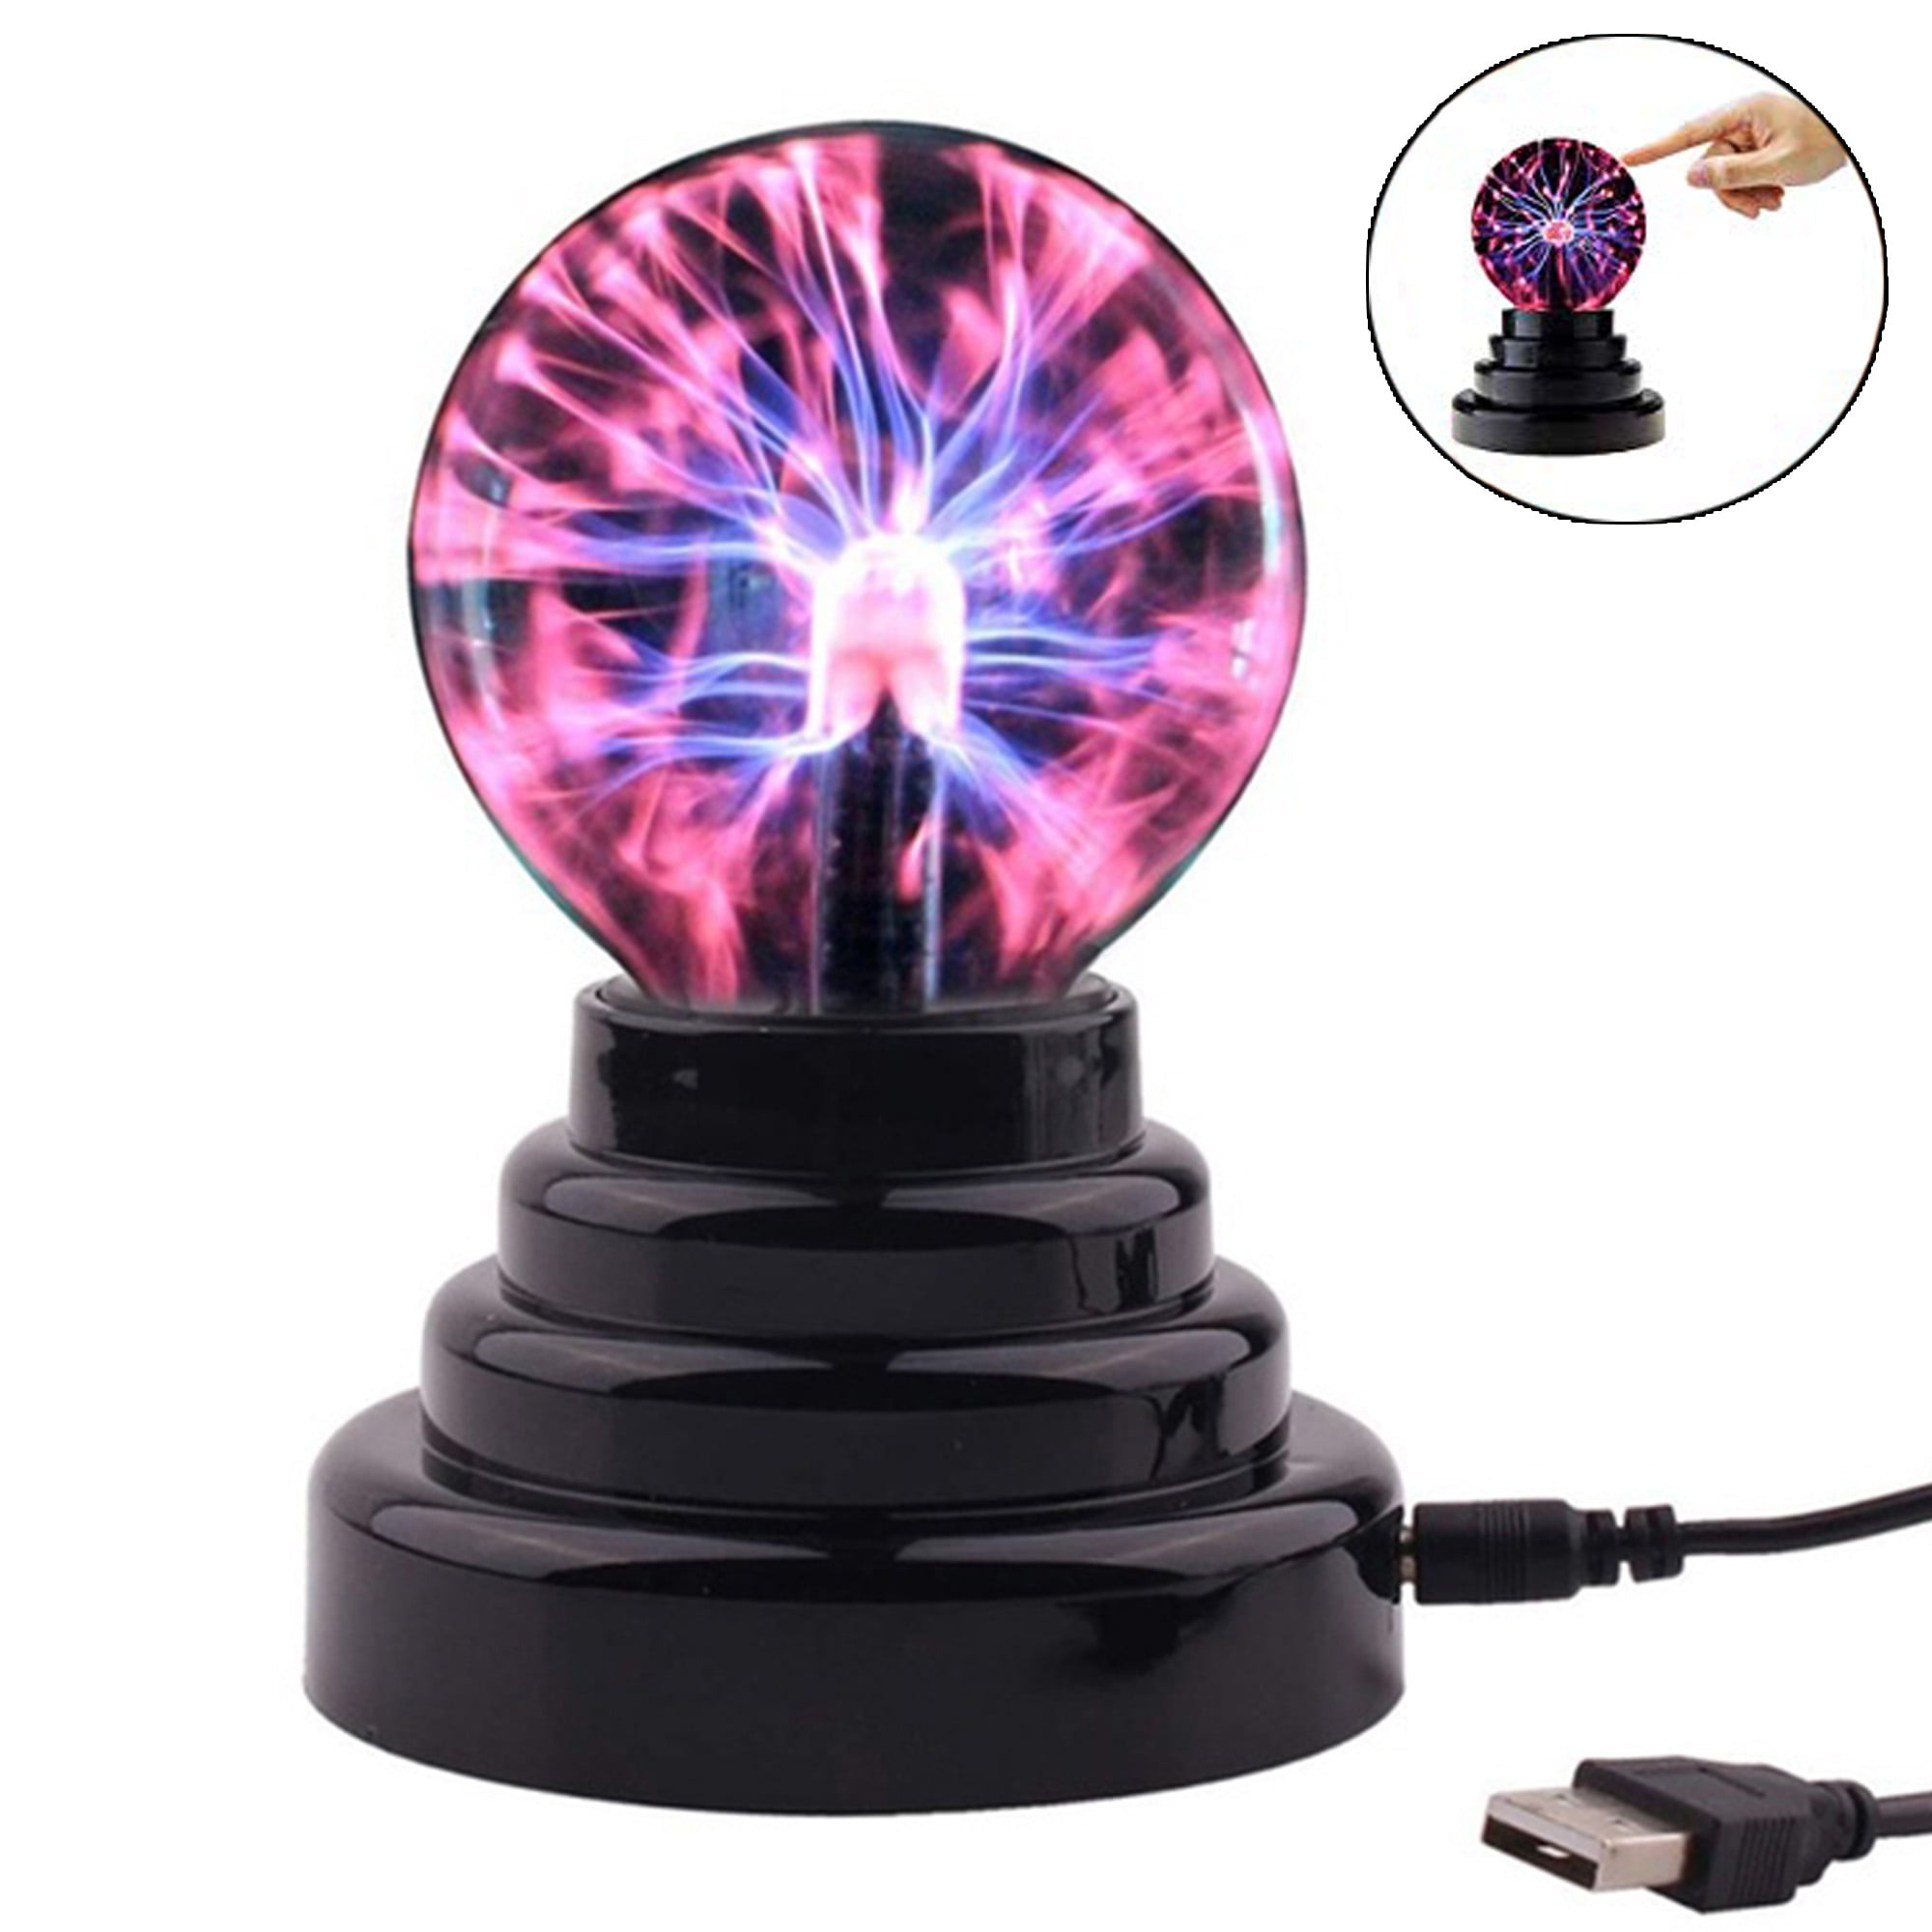 Science Educational Gift for Decorations/Parties/Bedroom Gresus 6 Inch Magic Plasma Ball Lamp Touch & Sound Sensitive Interactive USB Powered Plasma Lamp Nebula Sphere Globe